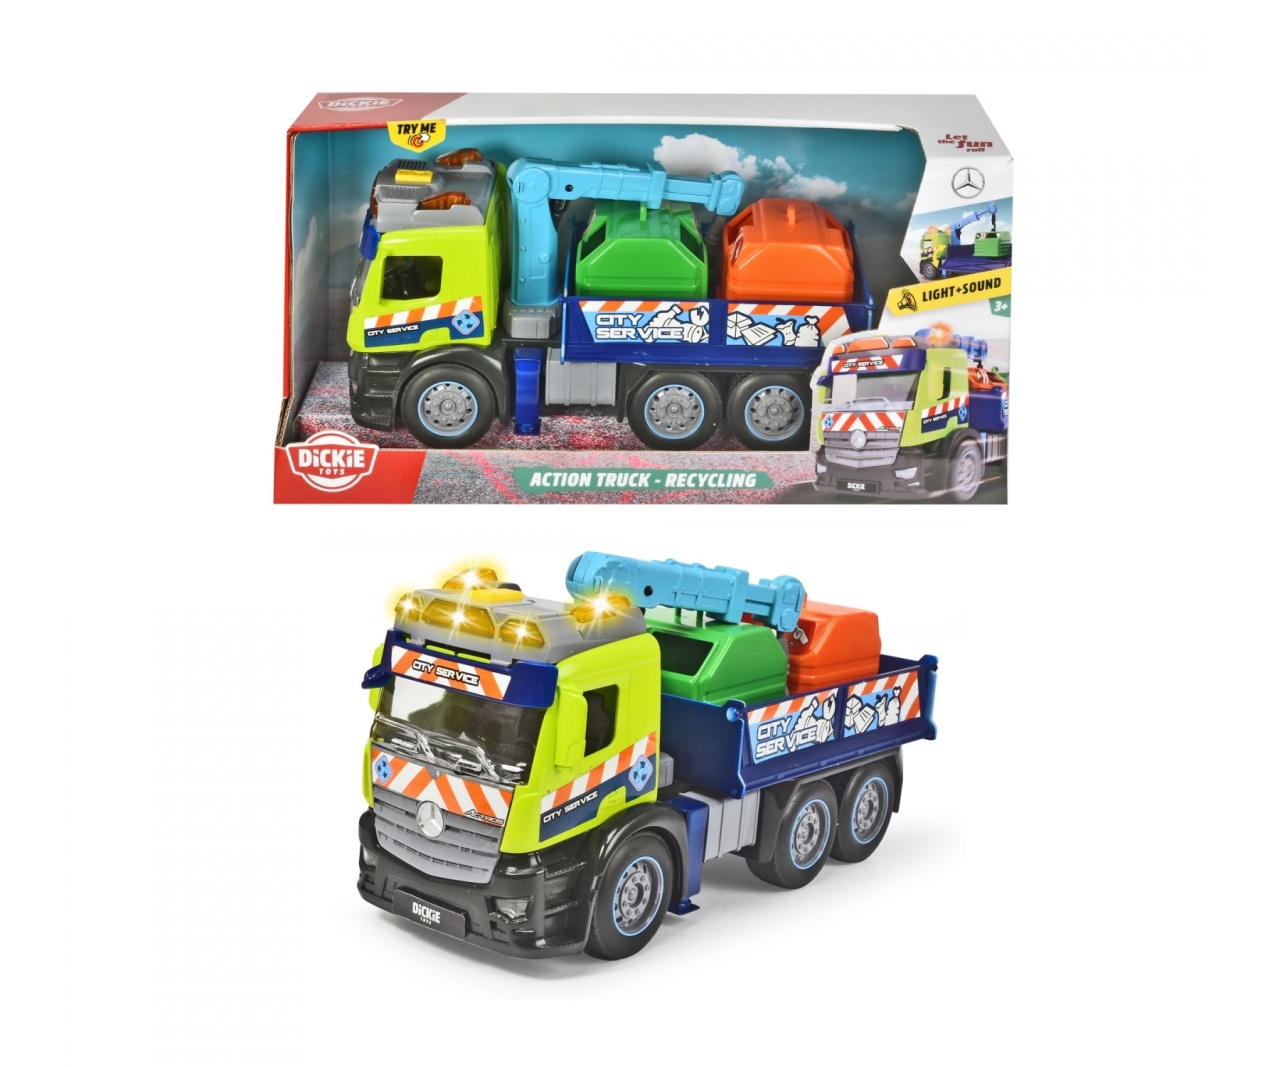 Action Truck - Recycling von Dickie Toys